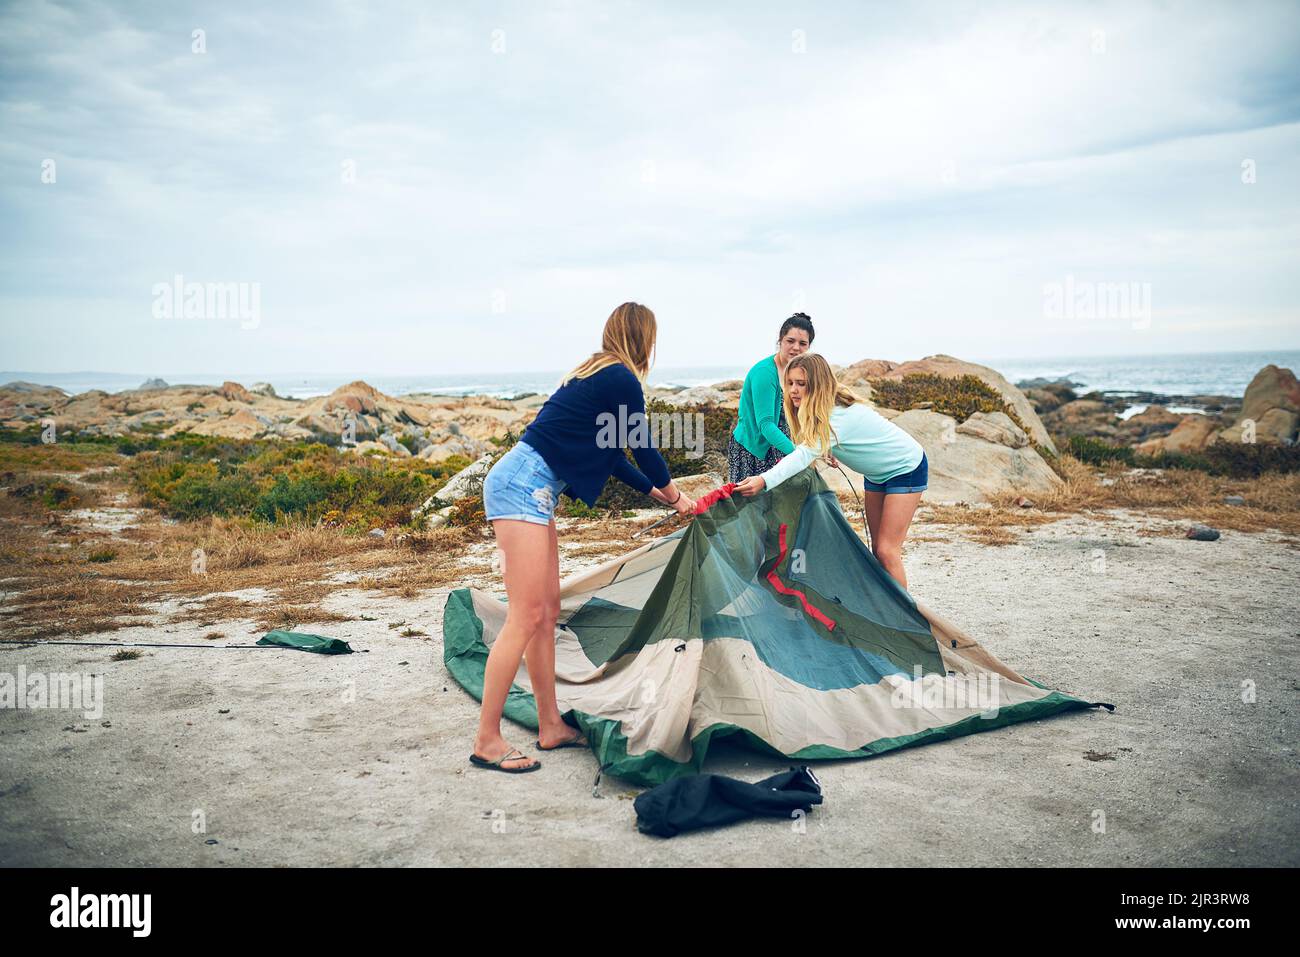 We all pitch in to set up the tent. a group of female friends setting up a tent outdoors. Stock Photo